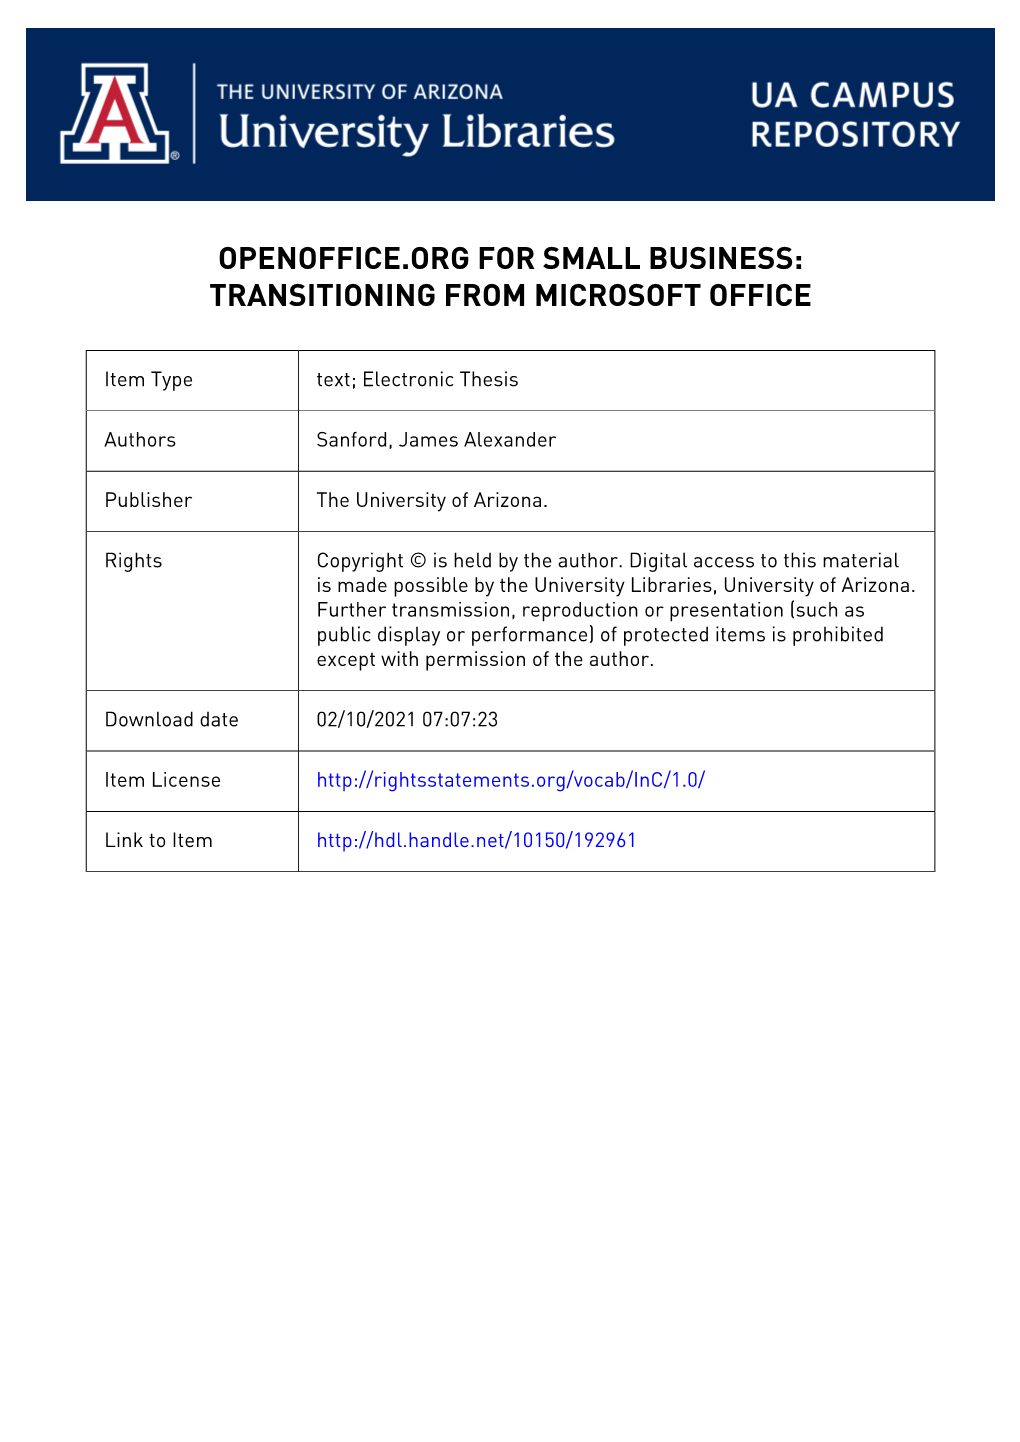 Openoffice.Org for Small Business: Transitioning from Microsoft Office